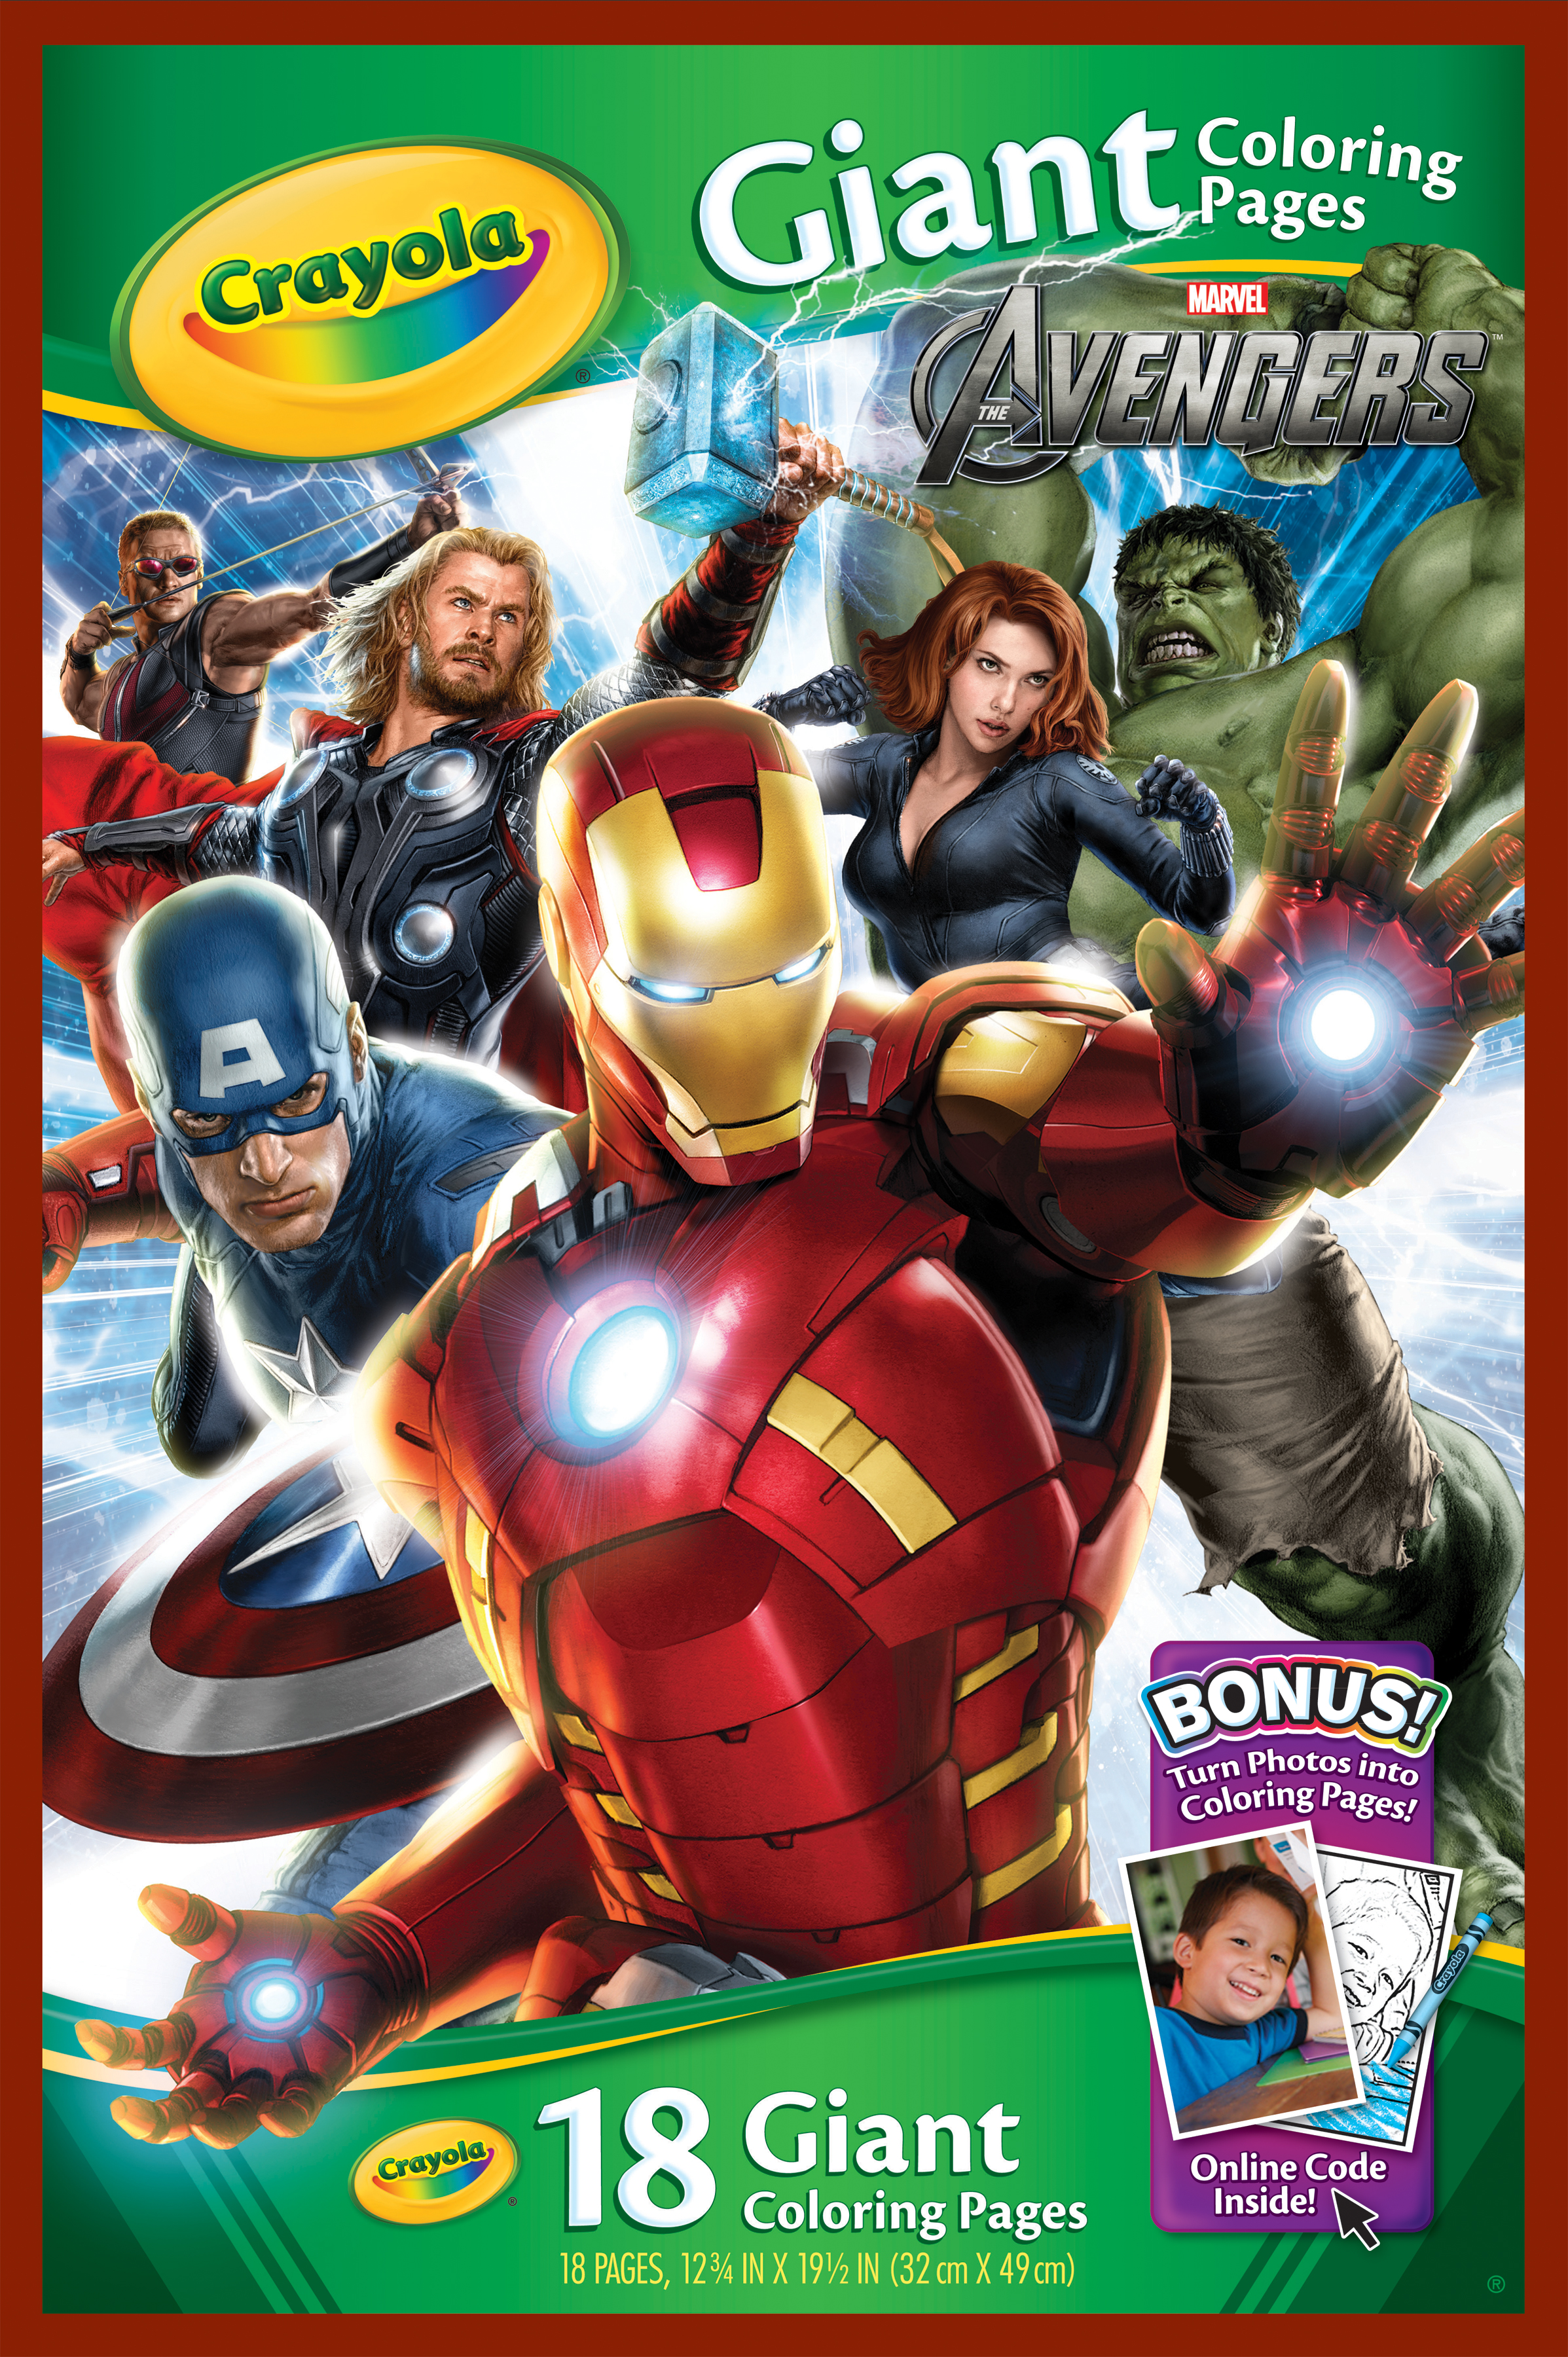 Giant Coloring Pages - Avengers | Crayola